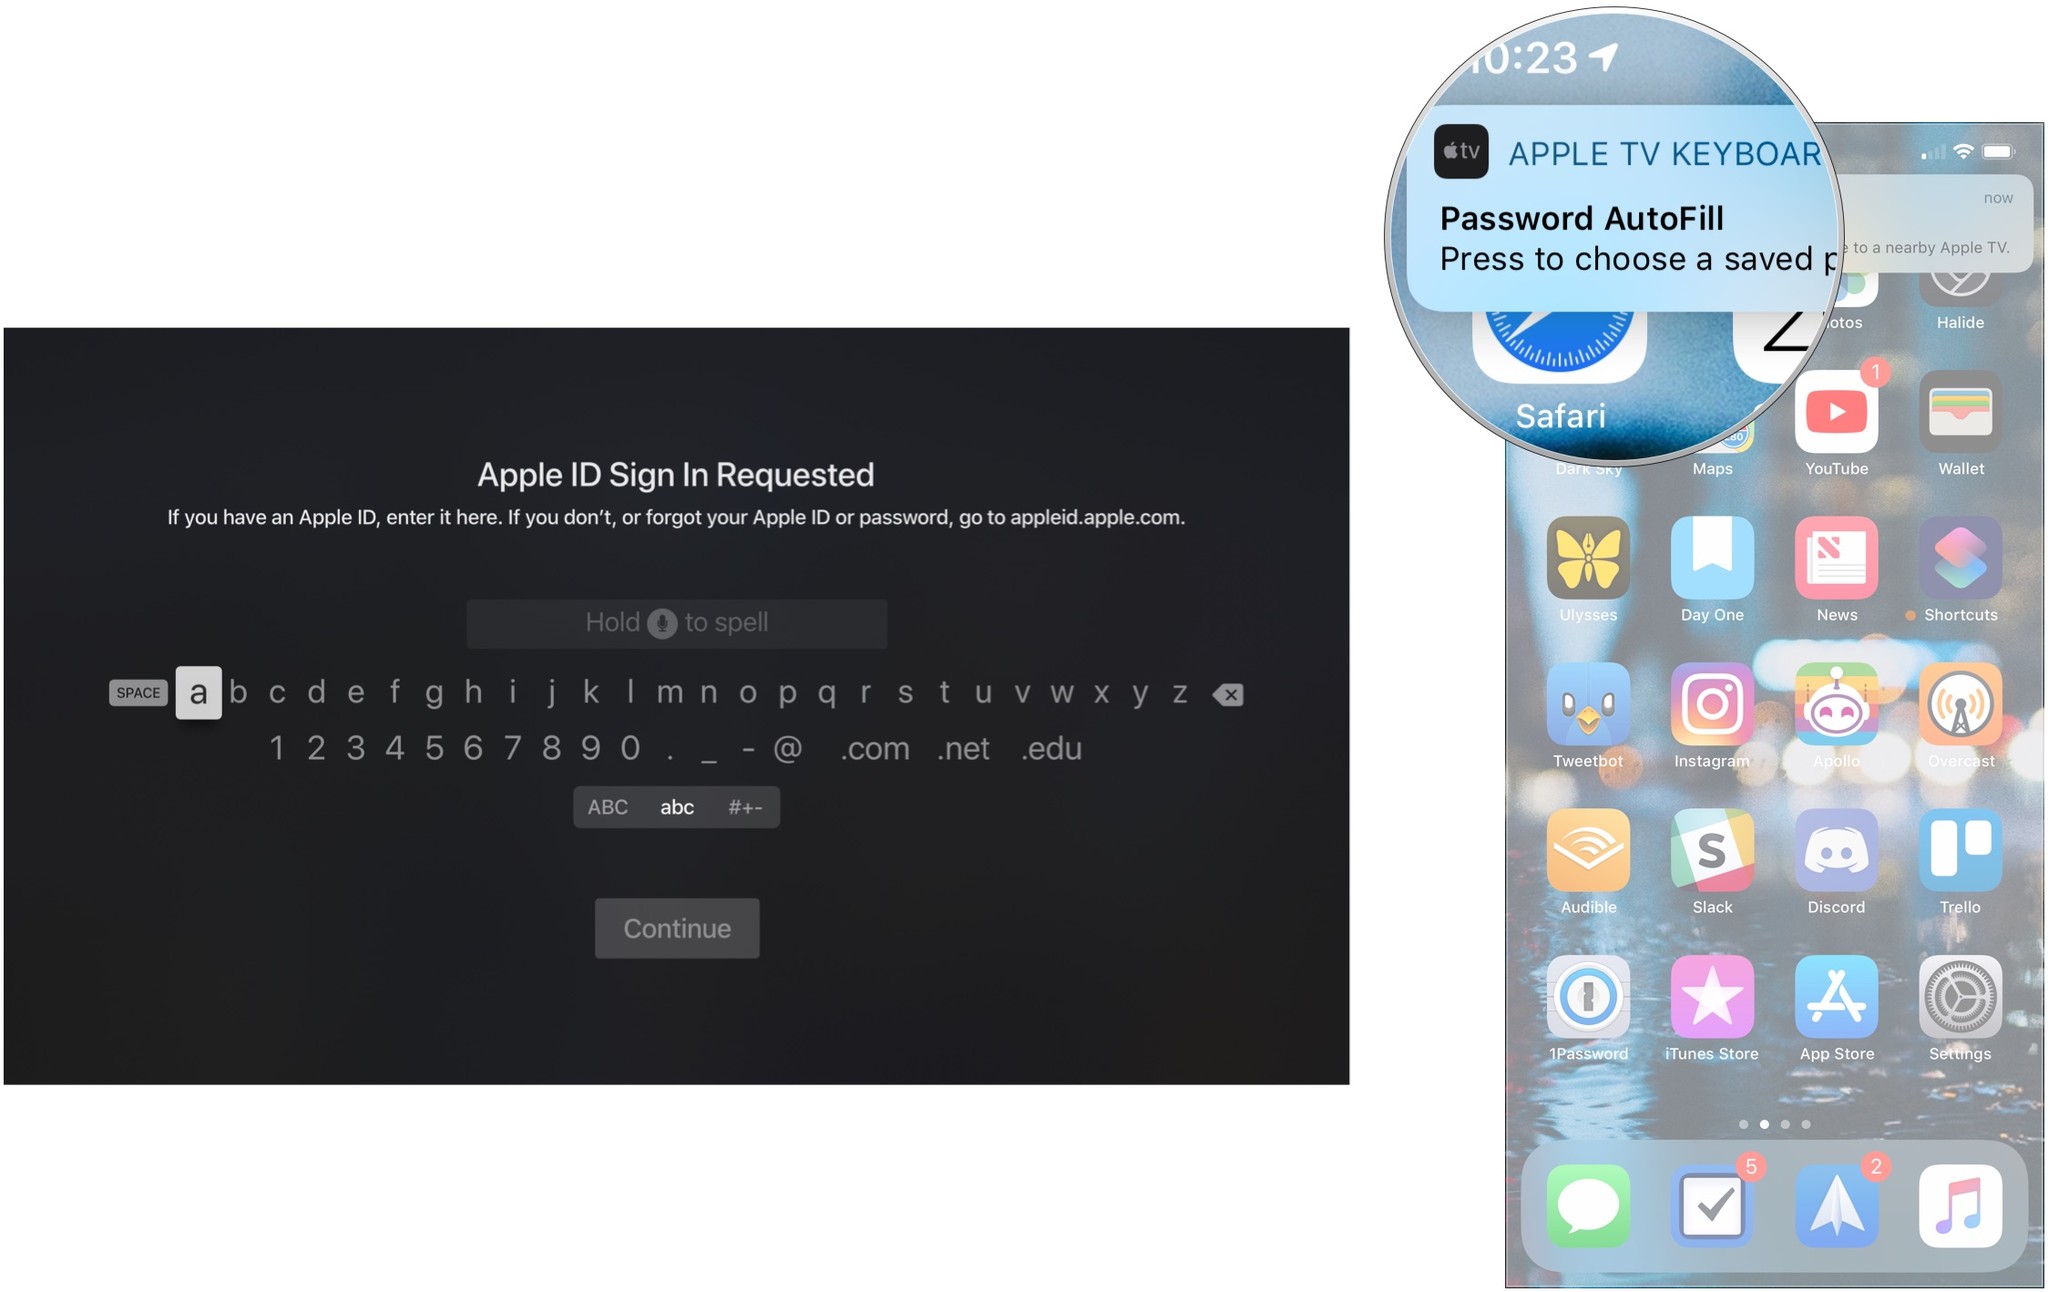 How to use AutoFill on the Apple TV and iPhone by showing steps: Navigate to a username or password field, tap the Password AutoFill notification your iPhone